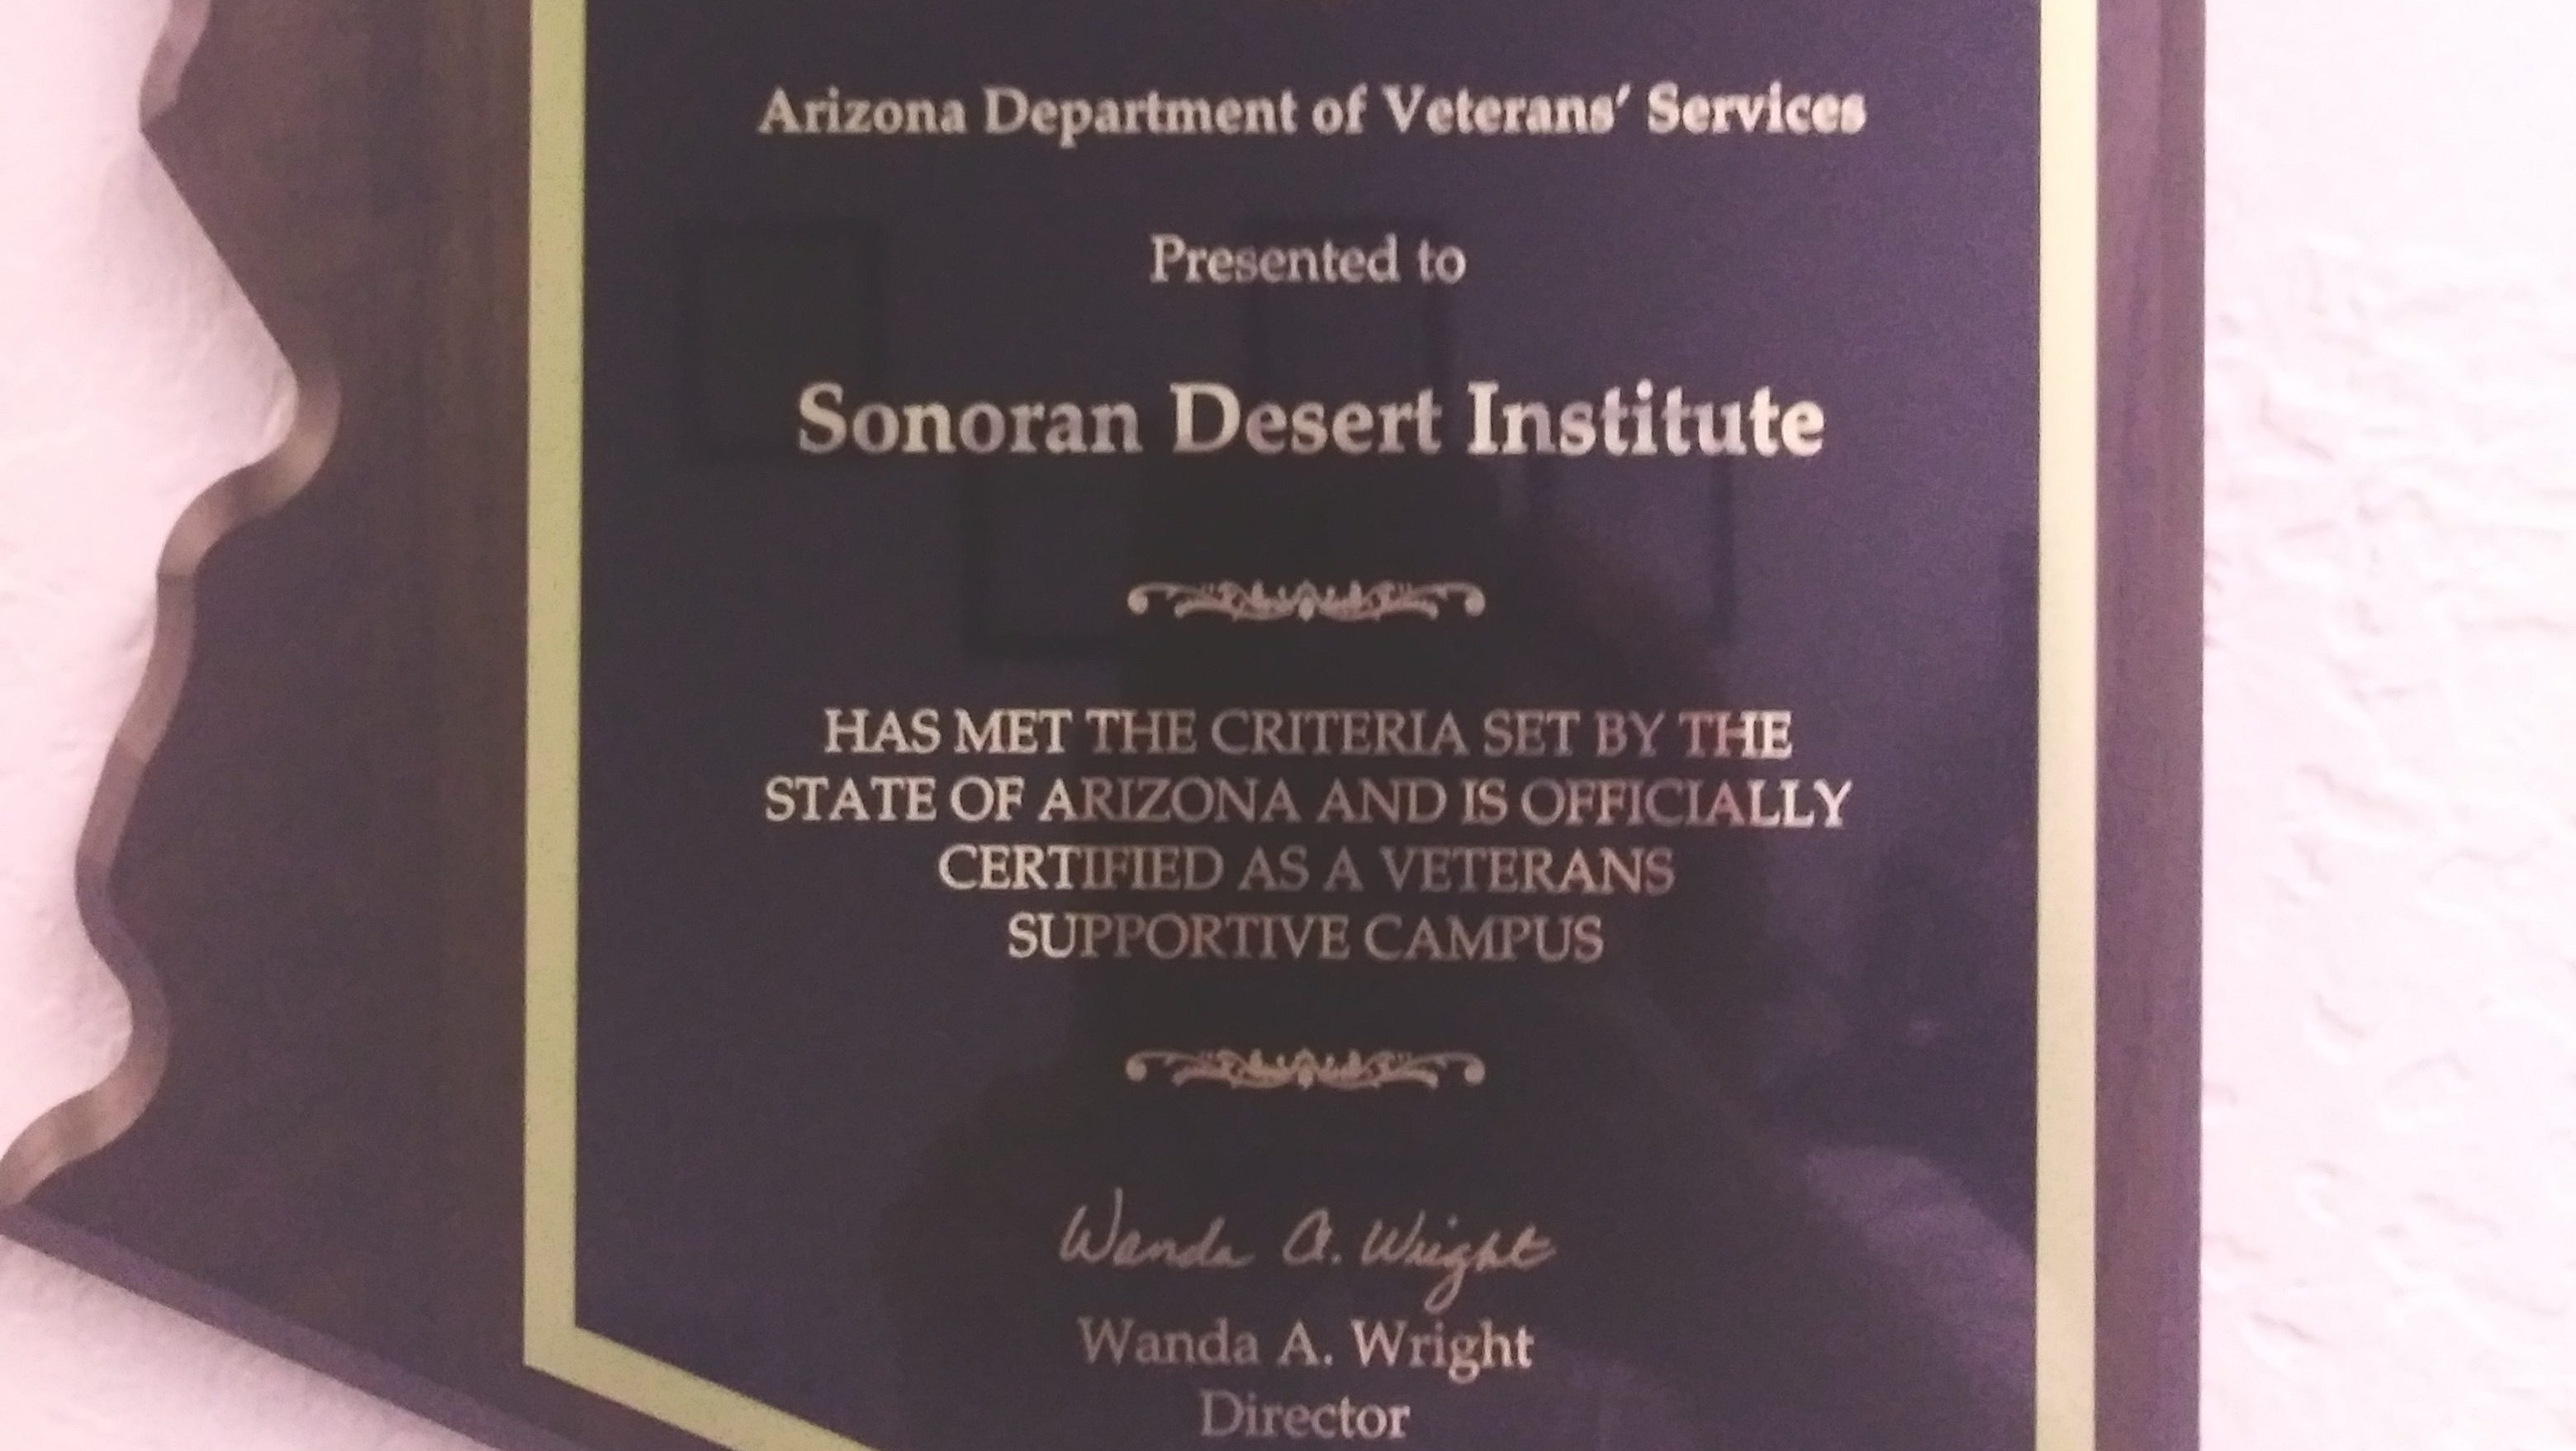 Image of a plaque recognizing SDIs accomplishments as a supportive campus for veterans